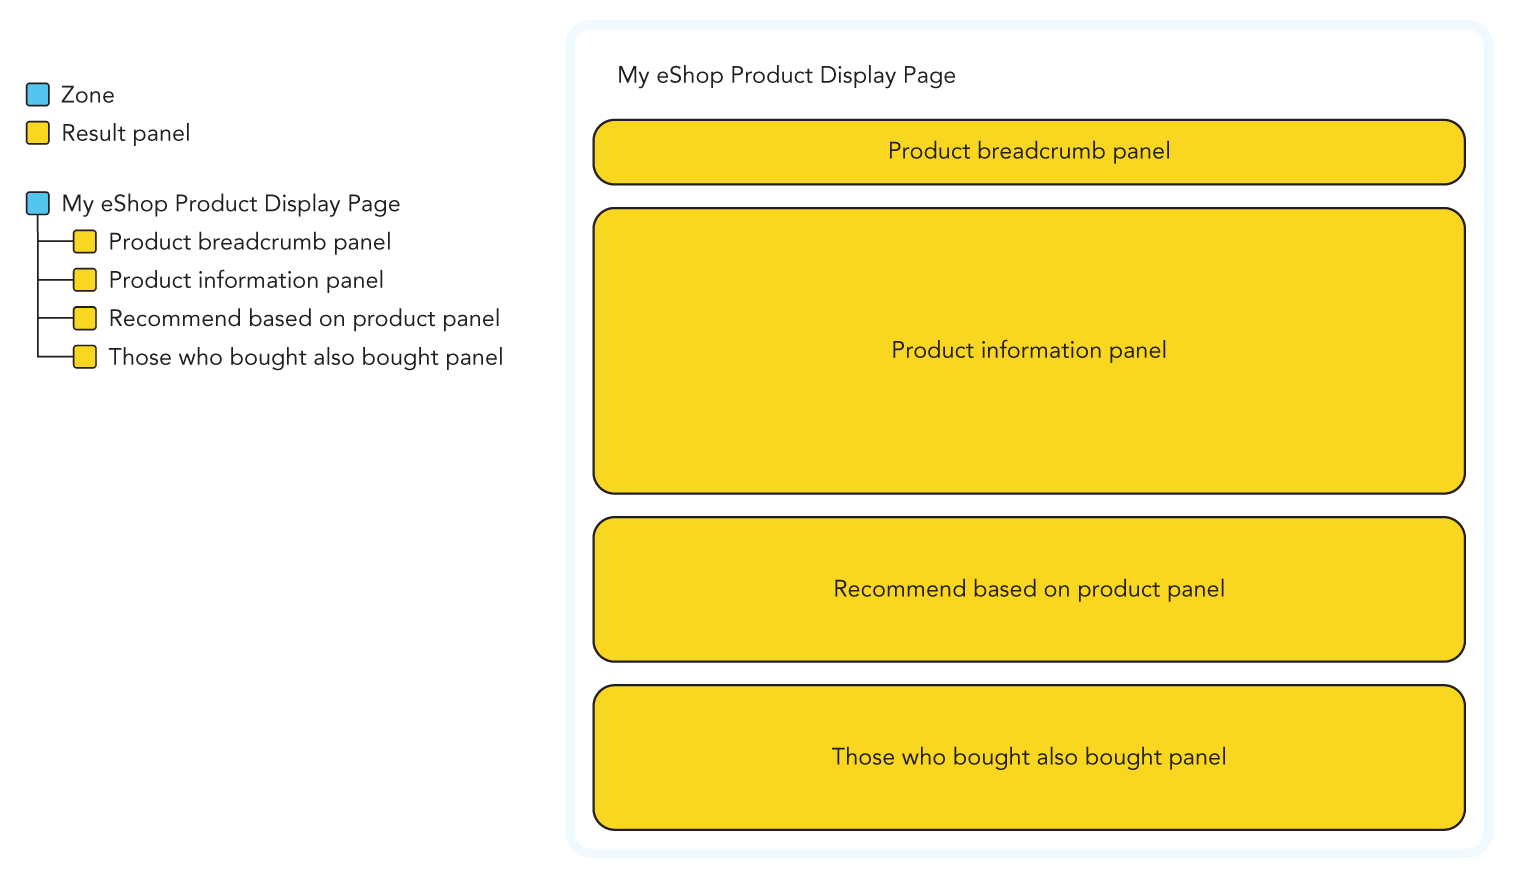 Illustration of the panel hierarchy of a product display page